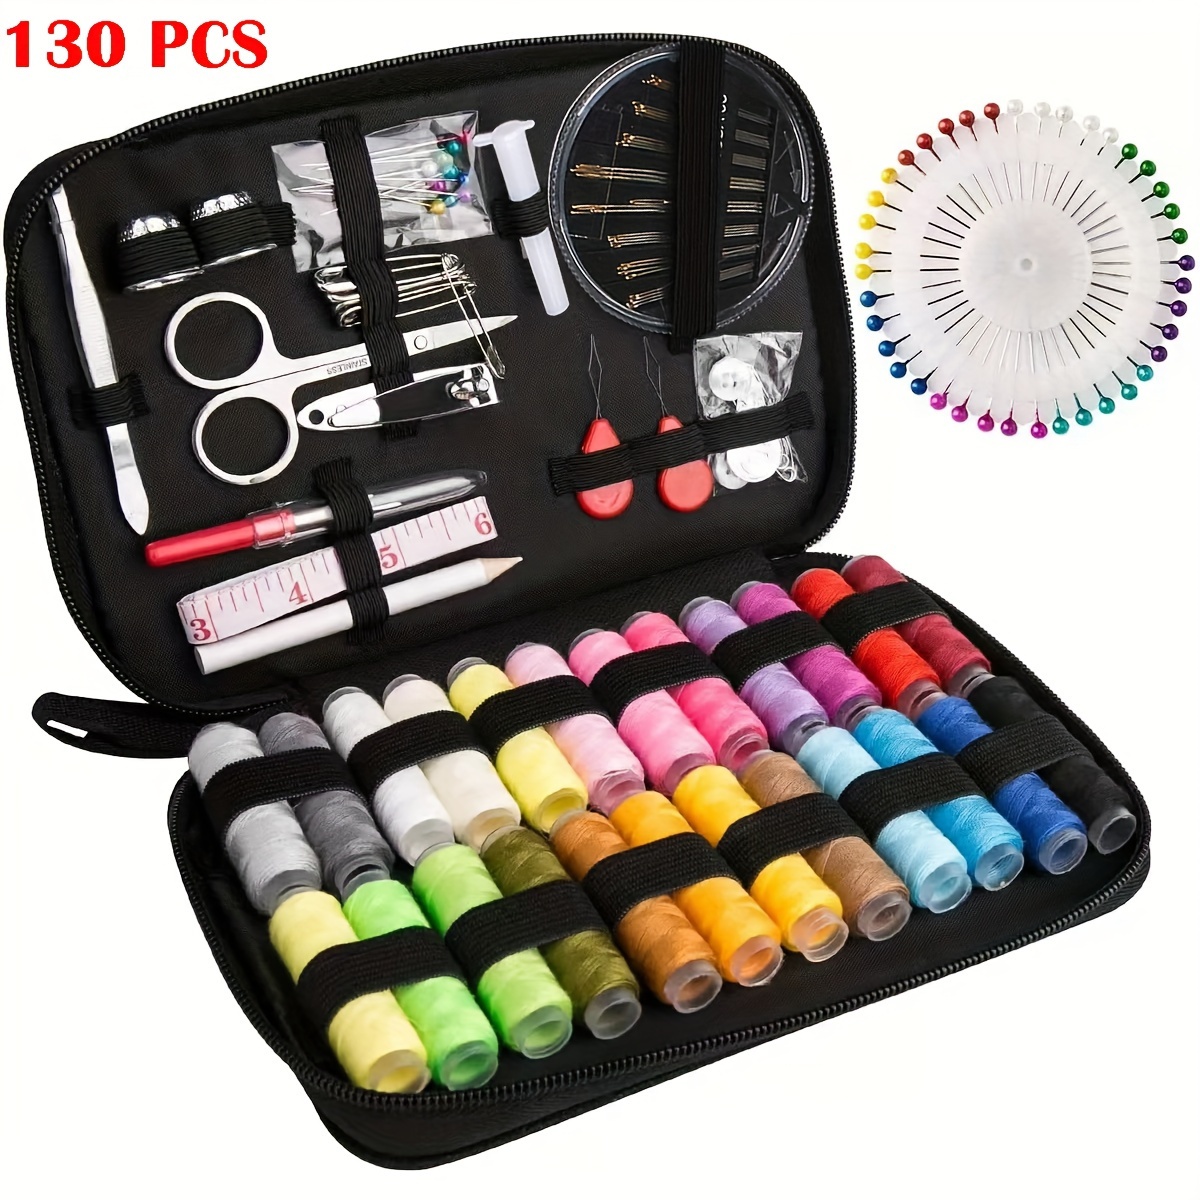 68 98 130pcs Sewing Kit Case Portable Sewing Supplies Home